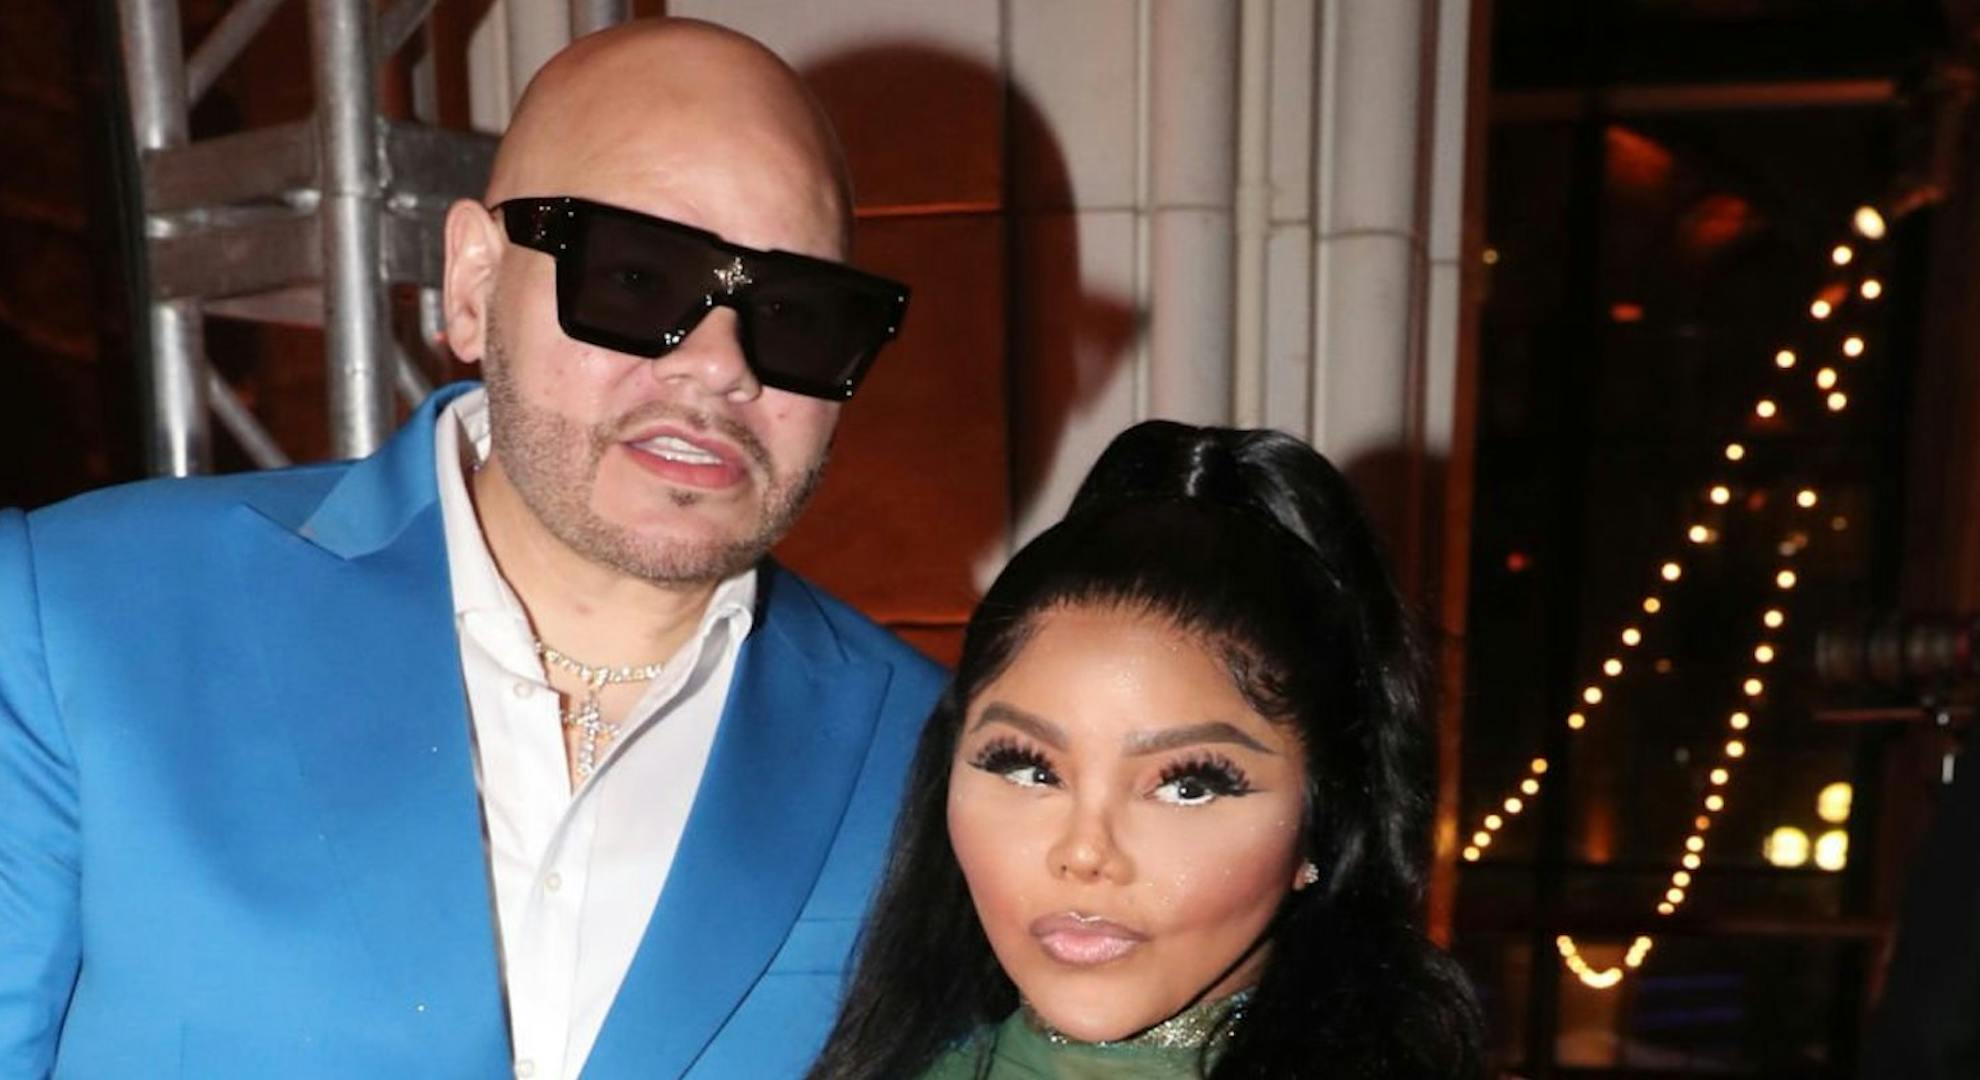 Fat Joe and Lil' Kim attend the CJ Wallace & Lexus Celebrate Hip-Hop and Honor the Life of Christopher Wallace (a.k.a The Notorious B.I.G) at the Lil' Kim Tribute Gala at Gustavino's on May 20, 2022 in New York City. (Photo by Johnny Nunez/Getty Images for Lexus)